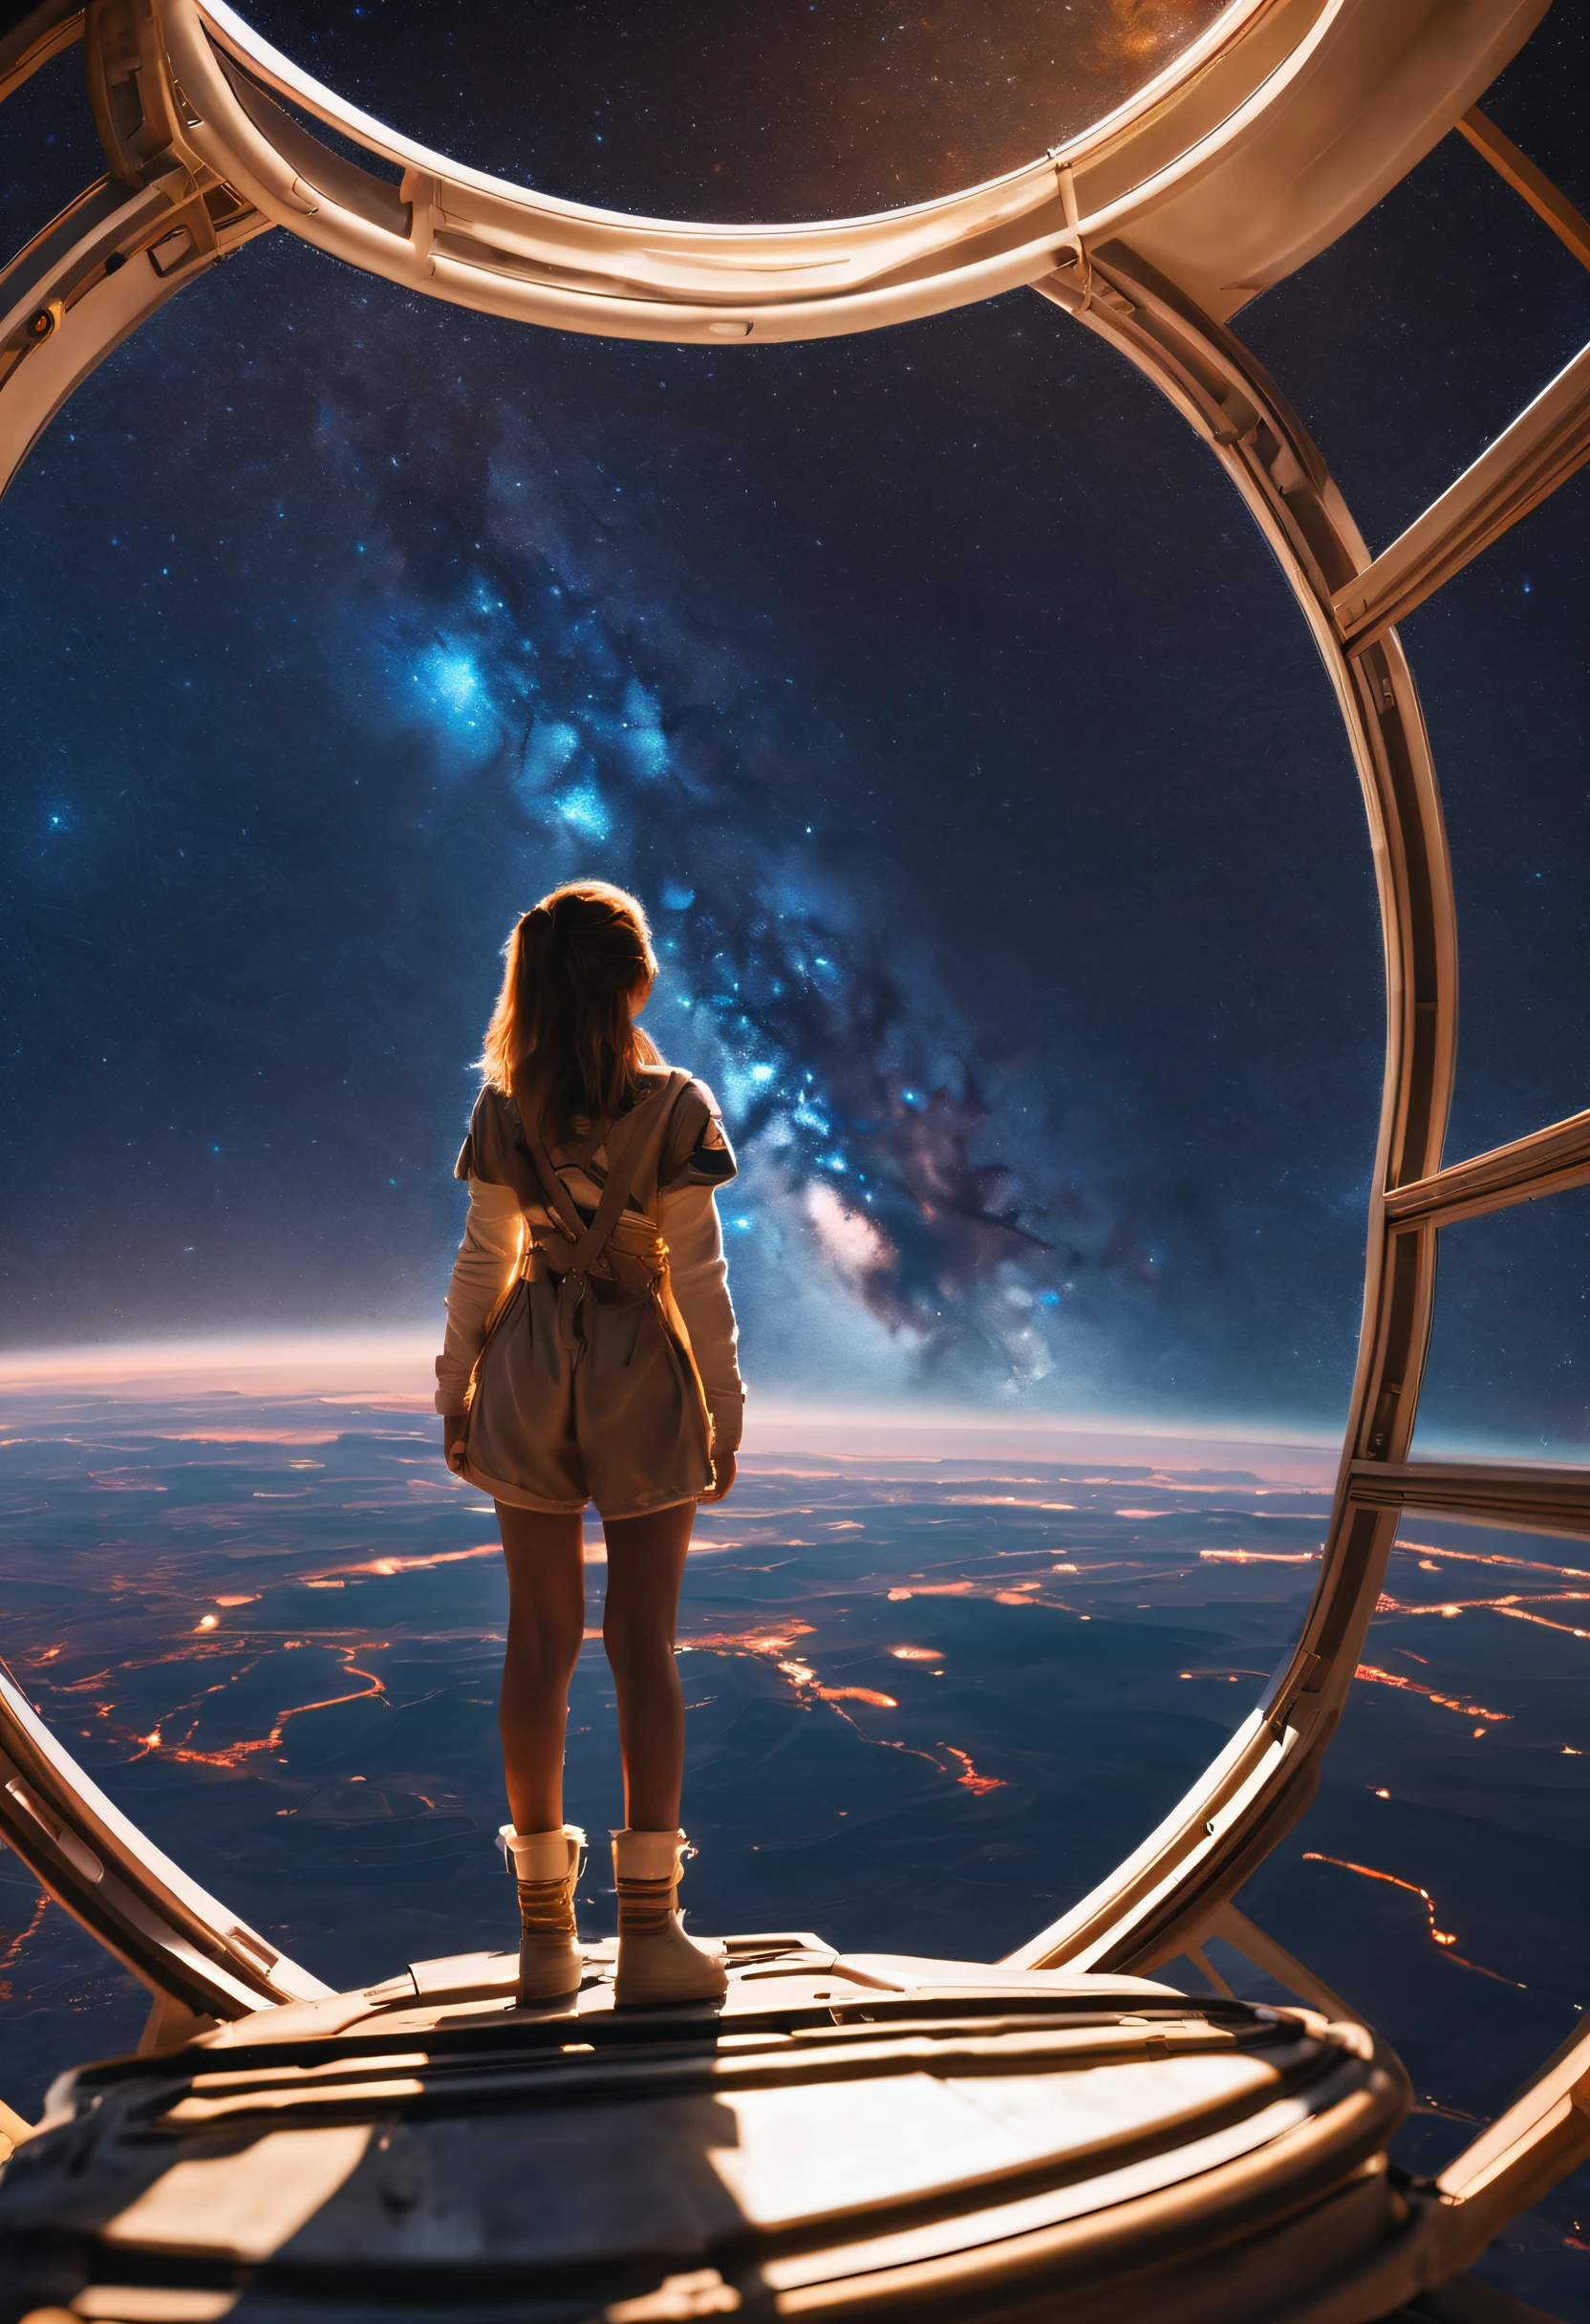 A girl stands on the edge of a majestic space station, overlooking the curvature of the Earth below, as the dazzling stars of the Milky Way paint the backdrop of her awe-inspiring panoramic view, blending the cosmic grandeur with her human presence.